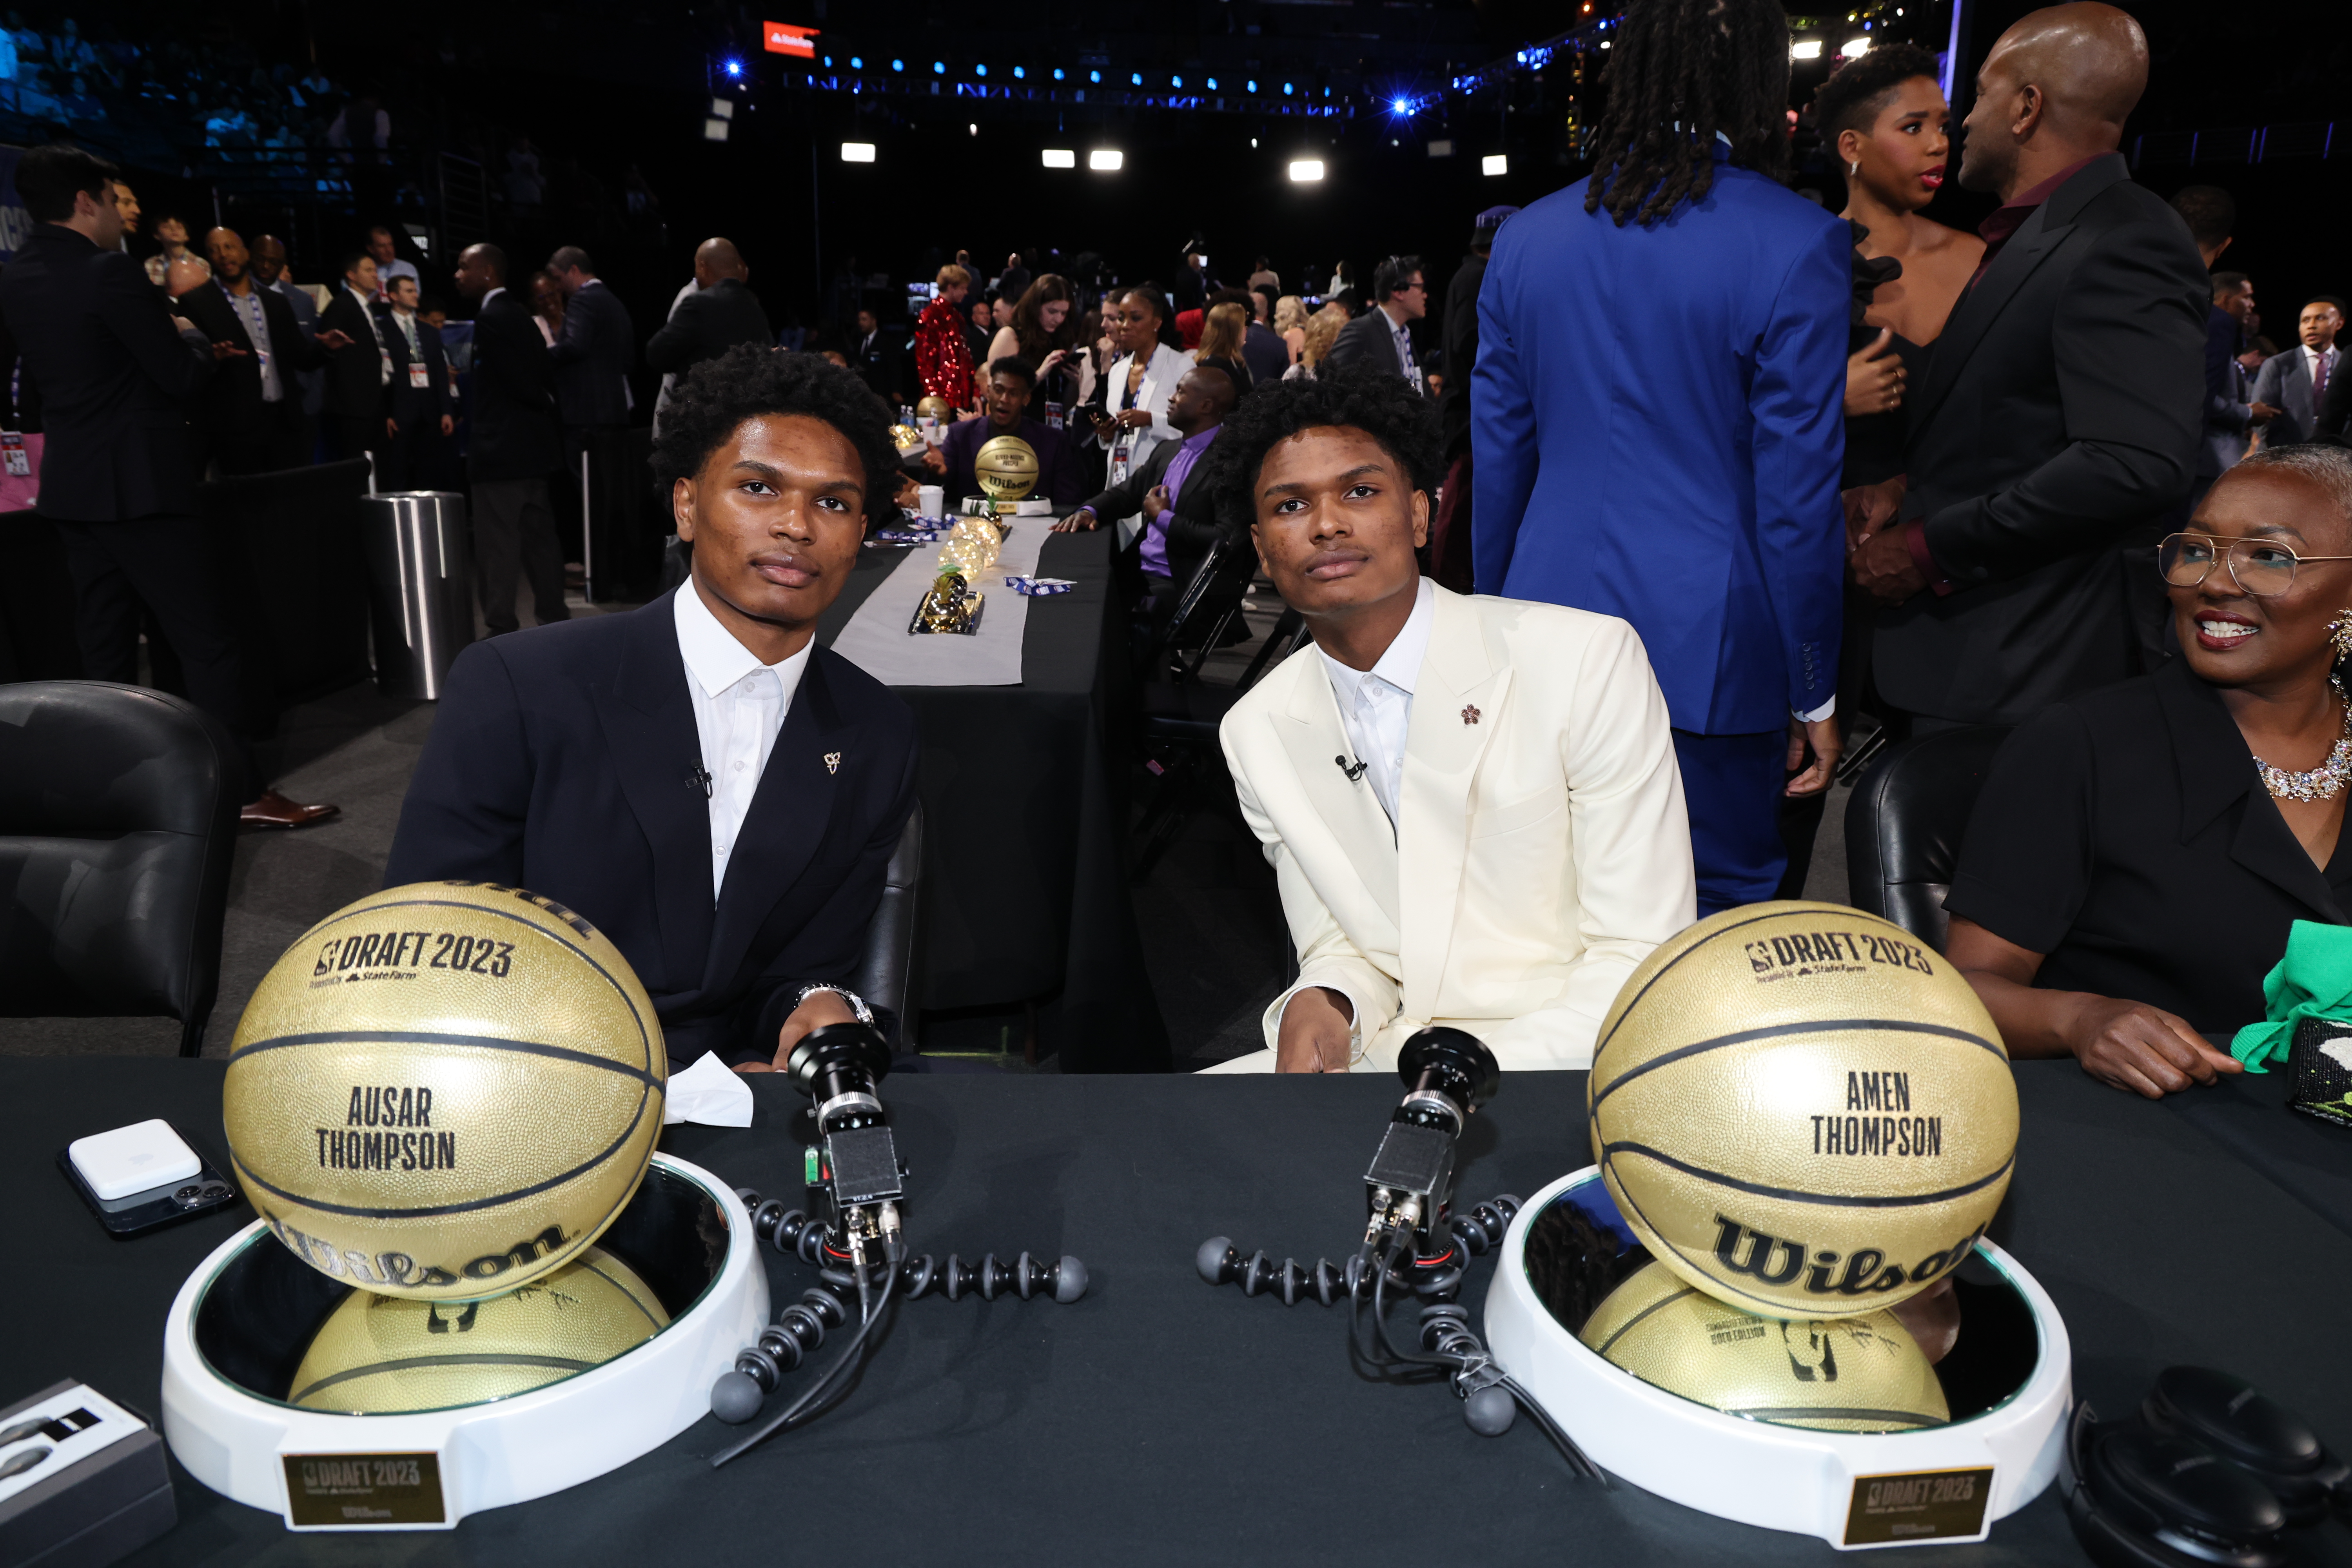 The Houston Rockets select Amen Thompson from Overtime Elite (R) with the fourth pick while the Detroit Pistons select his brother Ausar Thompson from the same team with the fifth pick in the NBA Draft at the Barclays Center in Brooklyn, New York City, June 22, 2023. /CFP